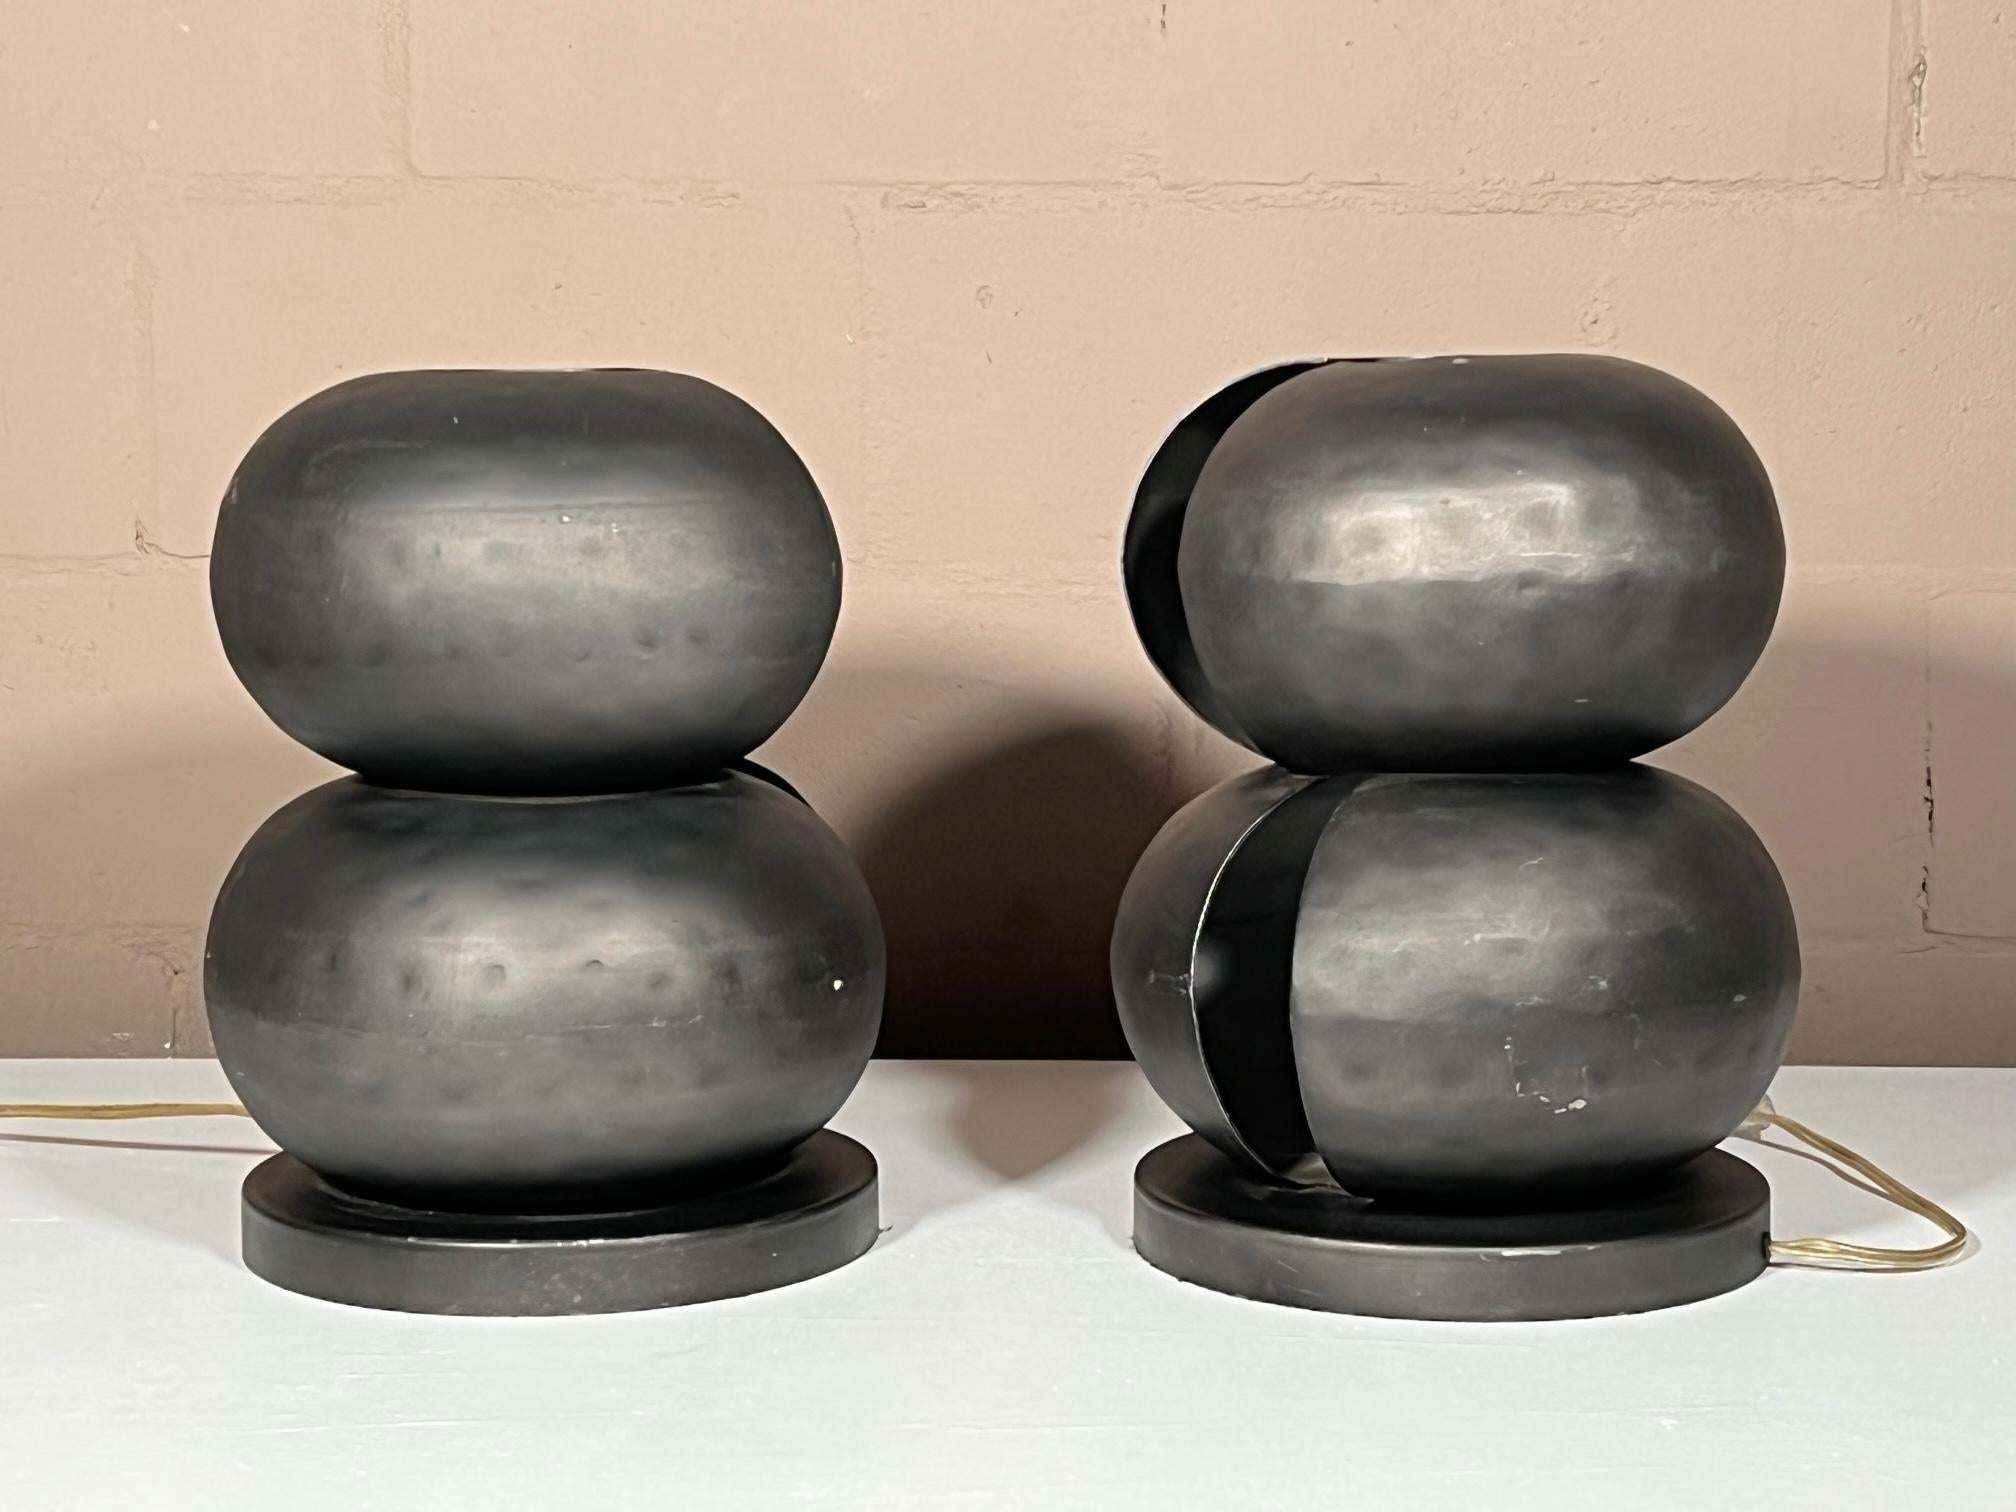 Funky and practical lamps from the W Hotel (Ft.Lauderdale). Could be used indoors or outdoors. Made of steel and heavy weighted bases. Twenty (20) available.